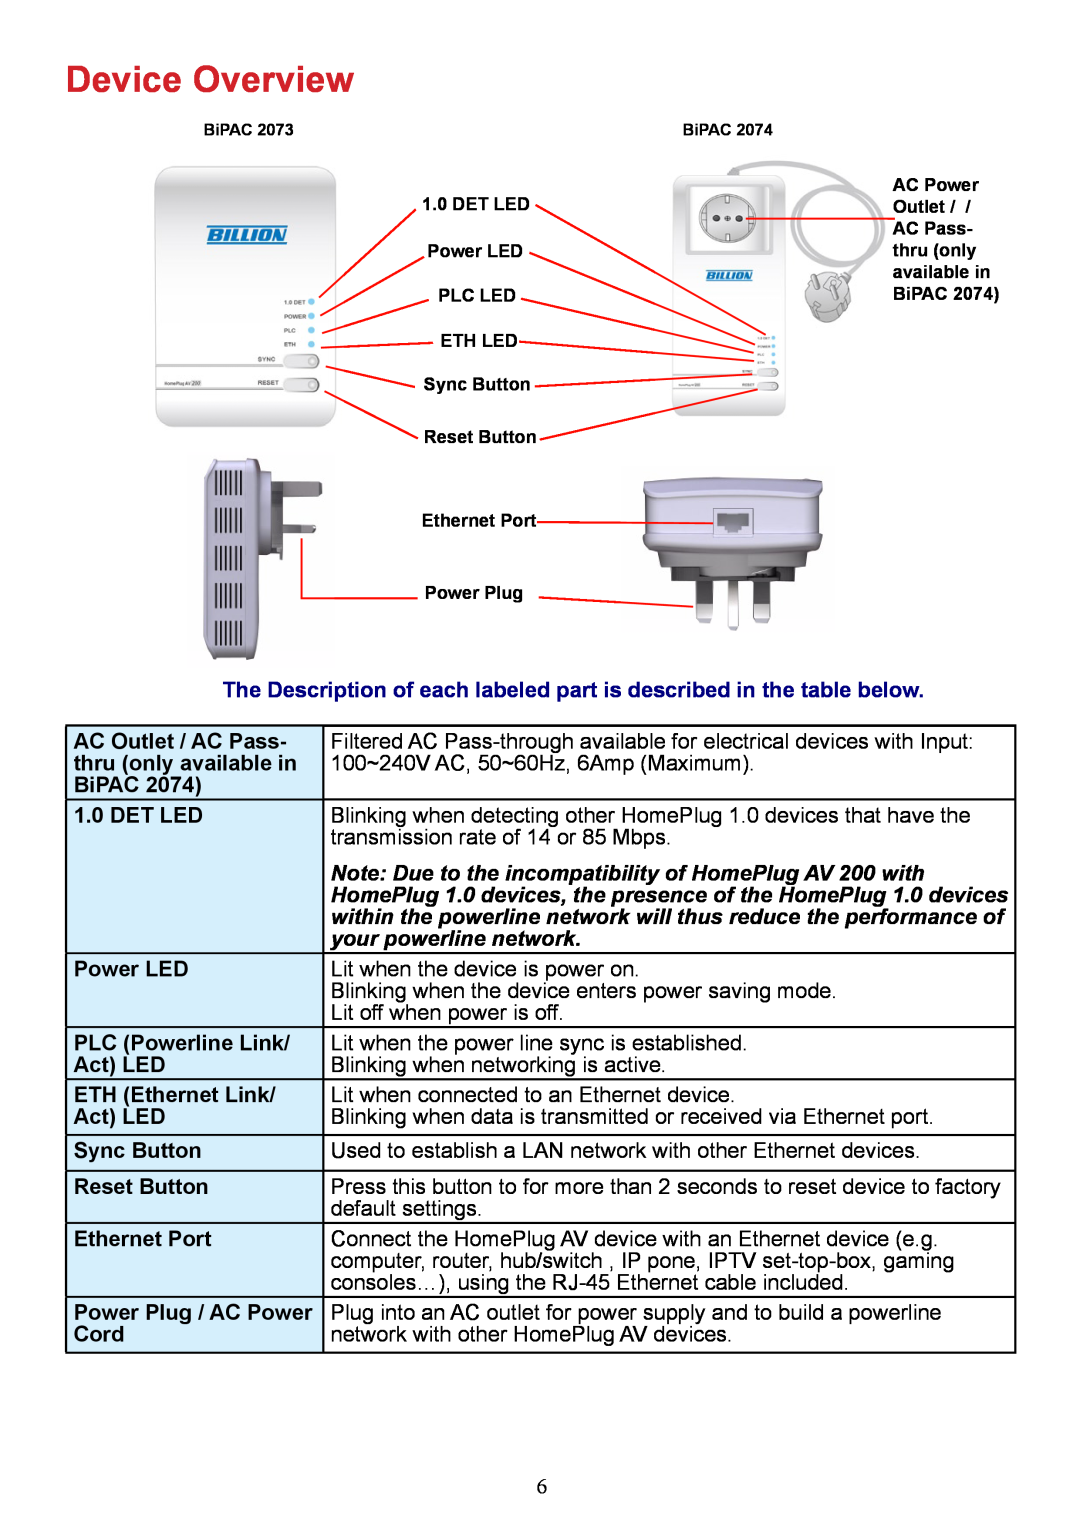 Billion Electric Company 2073 Device Overview, AC Outlet / AC Pass, thru only available in, BiPAC, Det Led, Power LED 